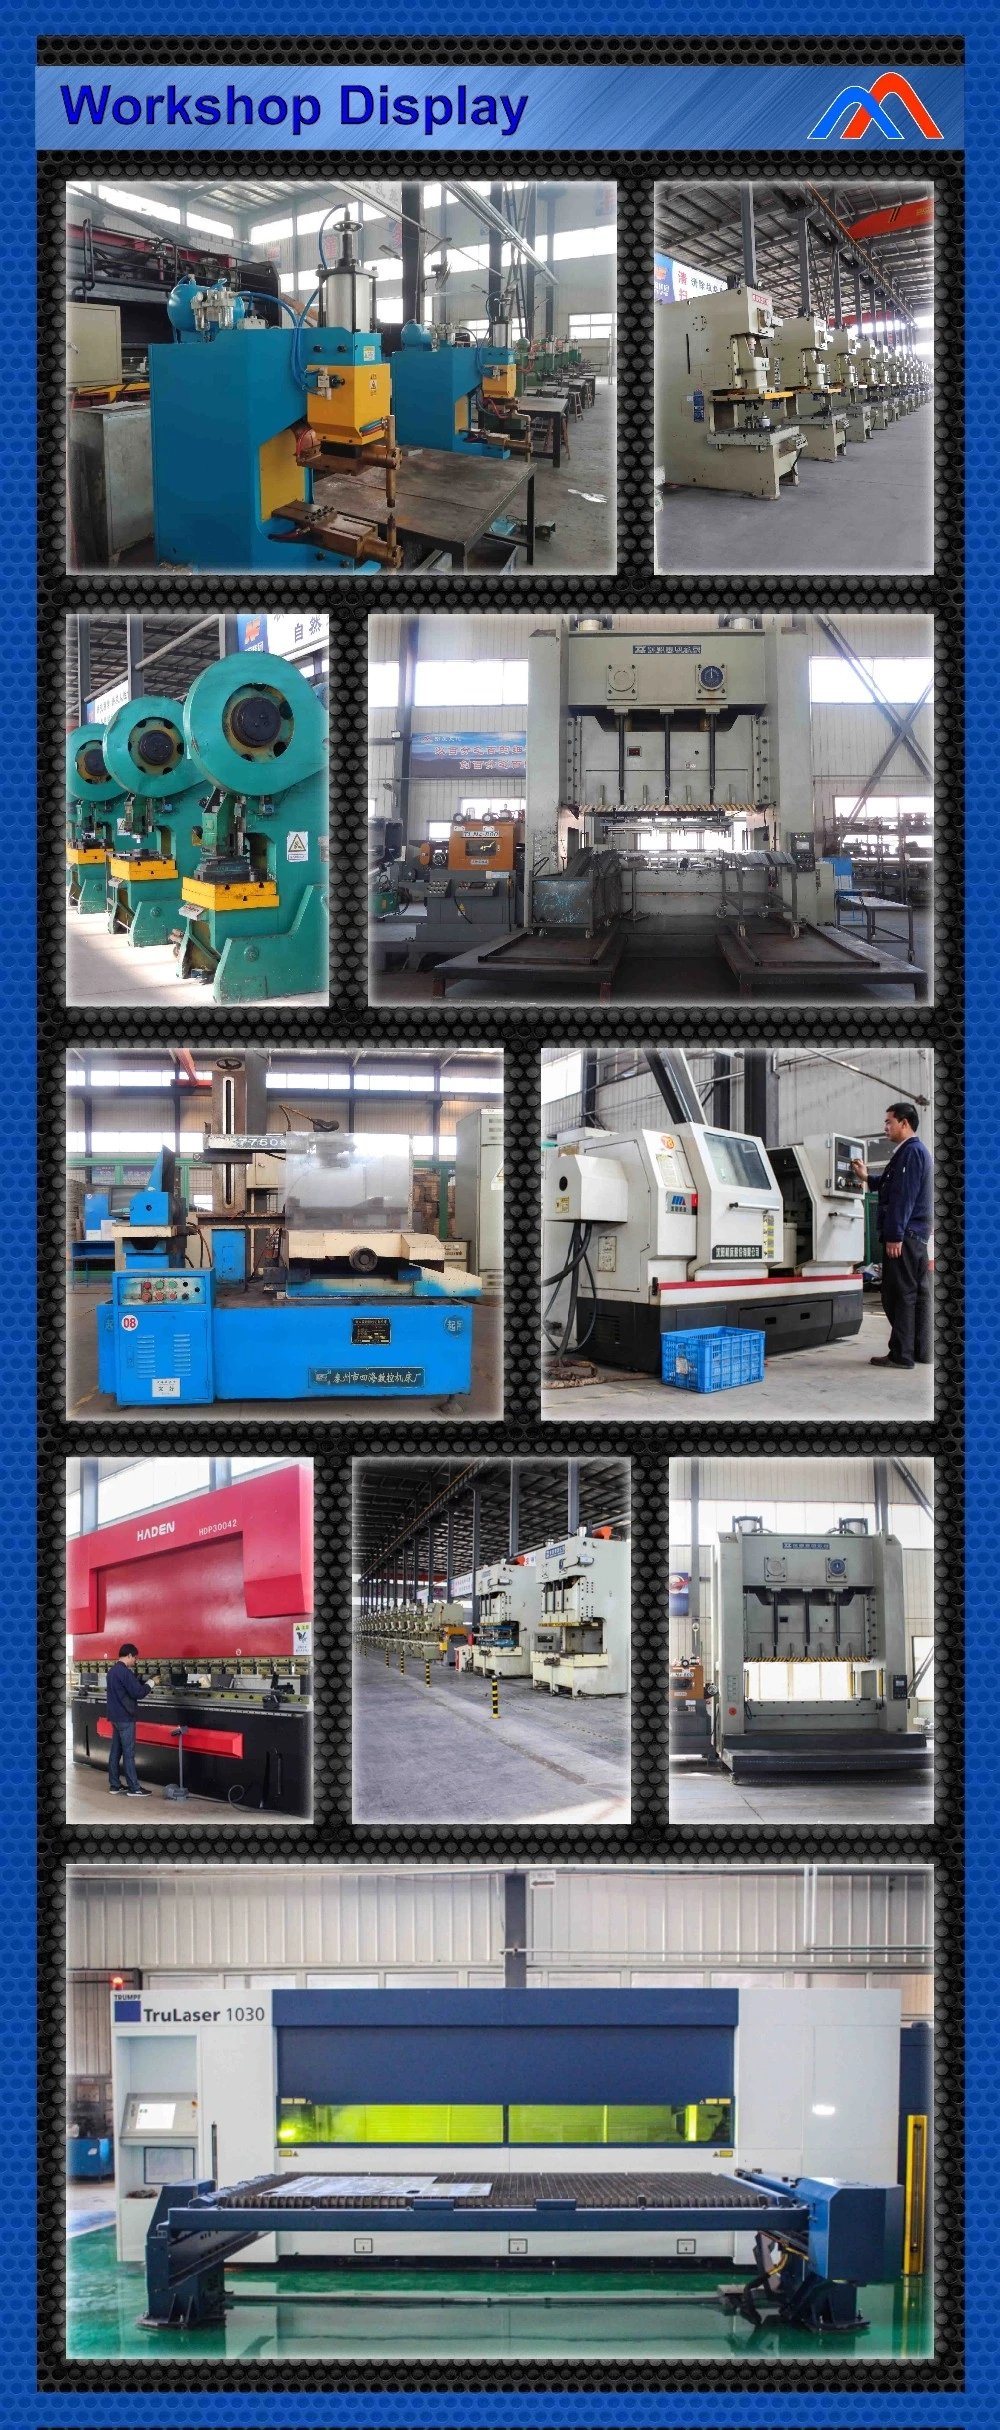 Precision Metal CNC Machining/Machinery/Machined Parts by Turning and Milling